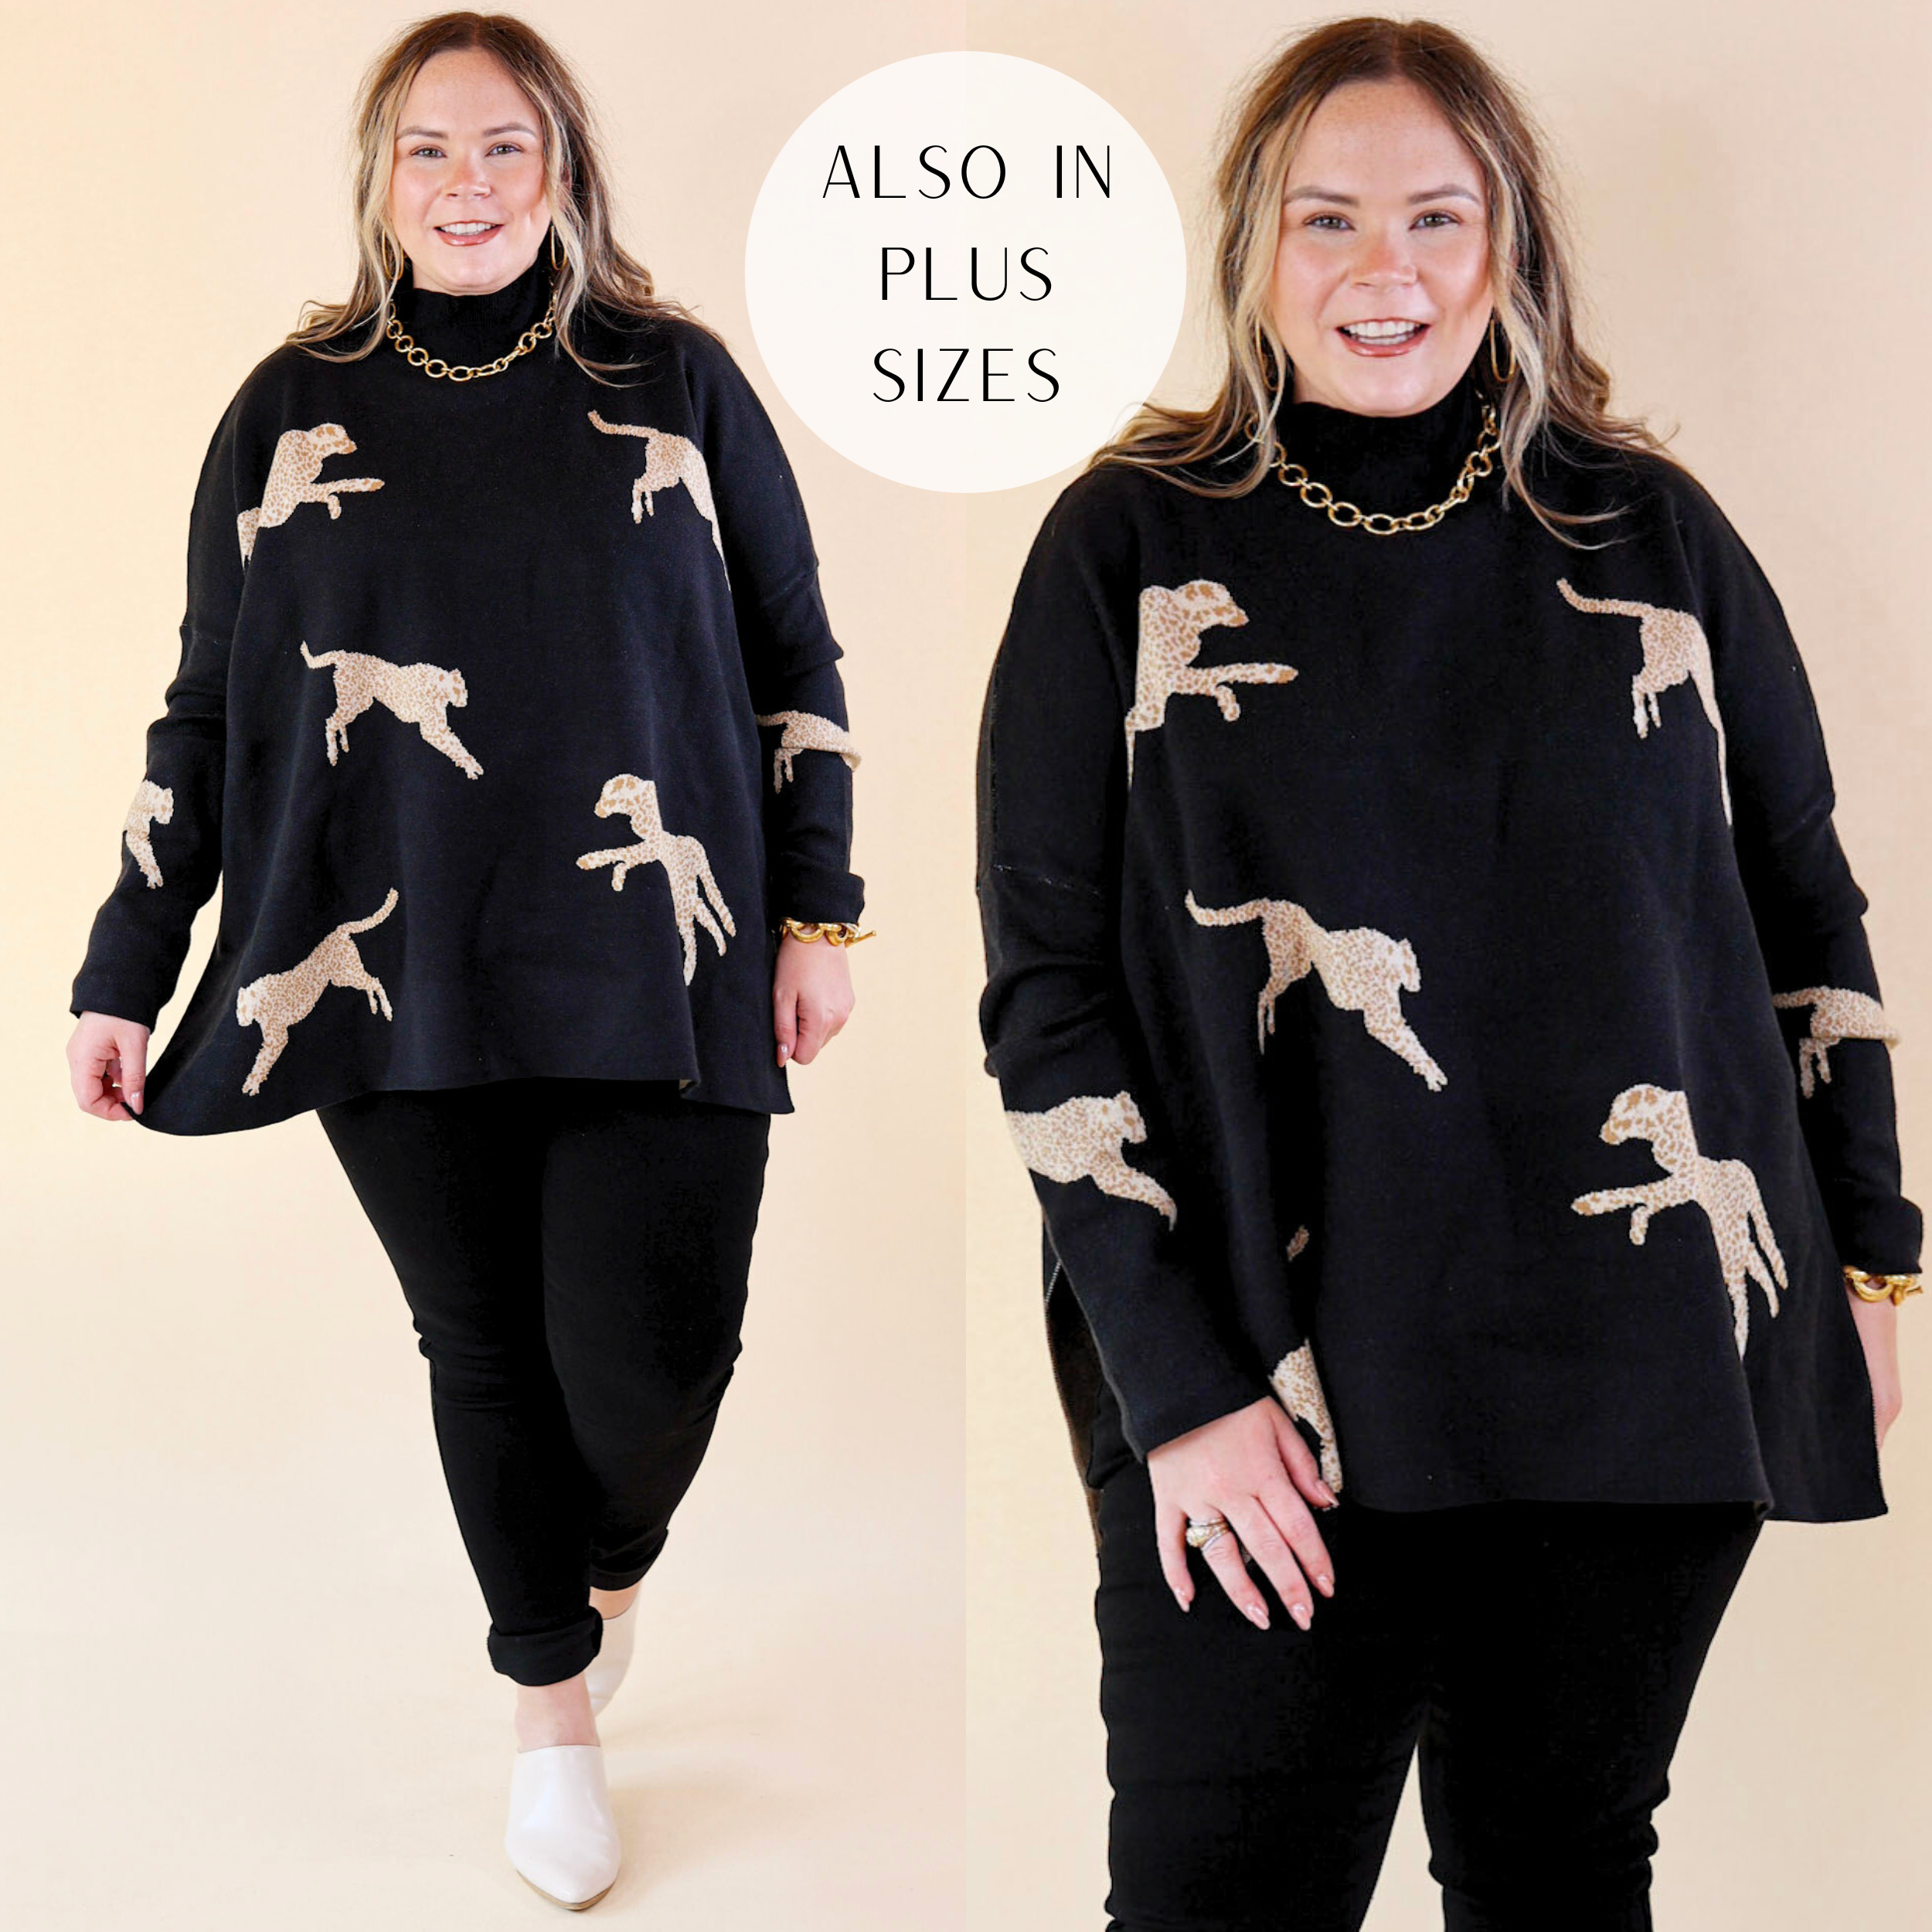 Model is wearing a black long sleeve sweater featuring a mock neck and cheetahs throughout.